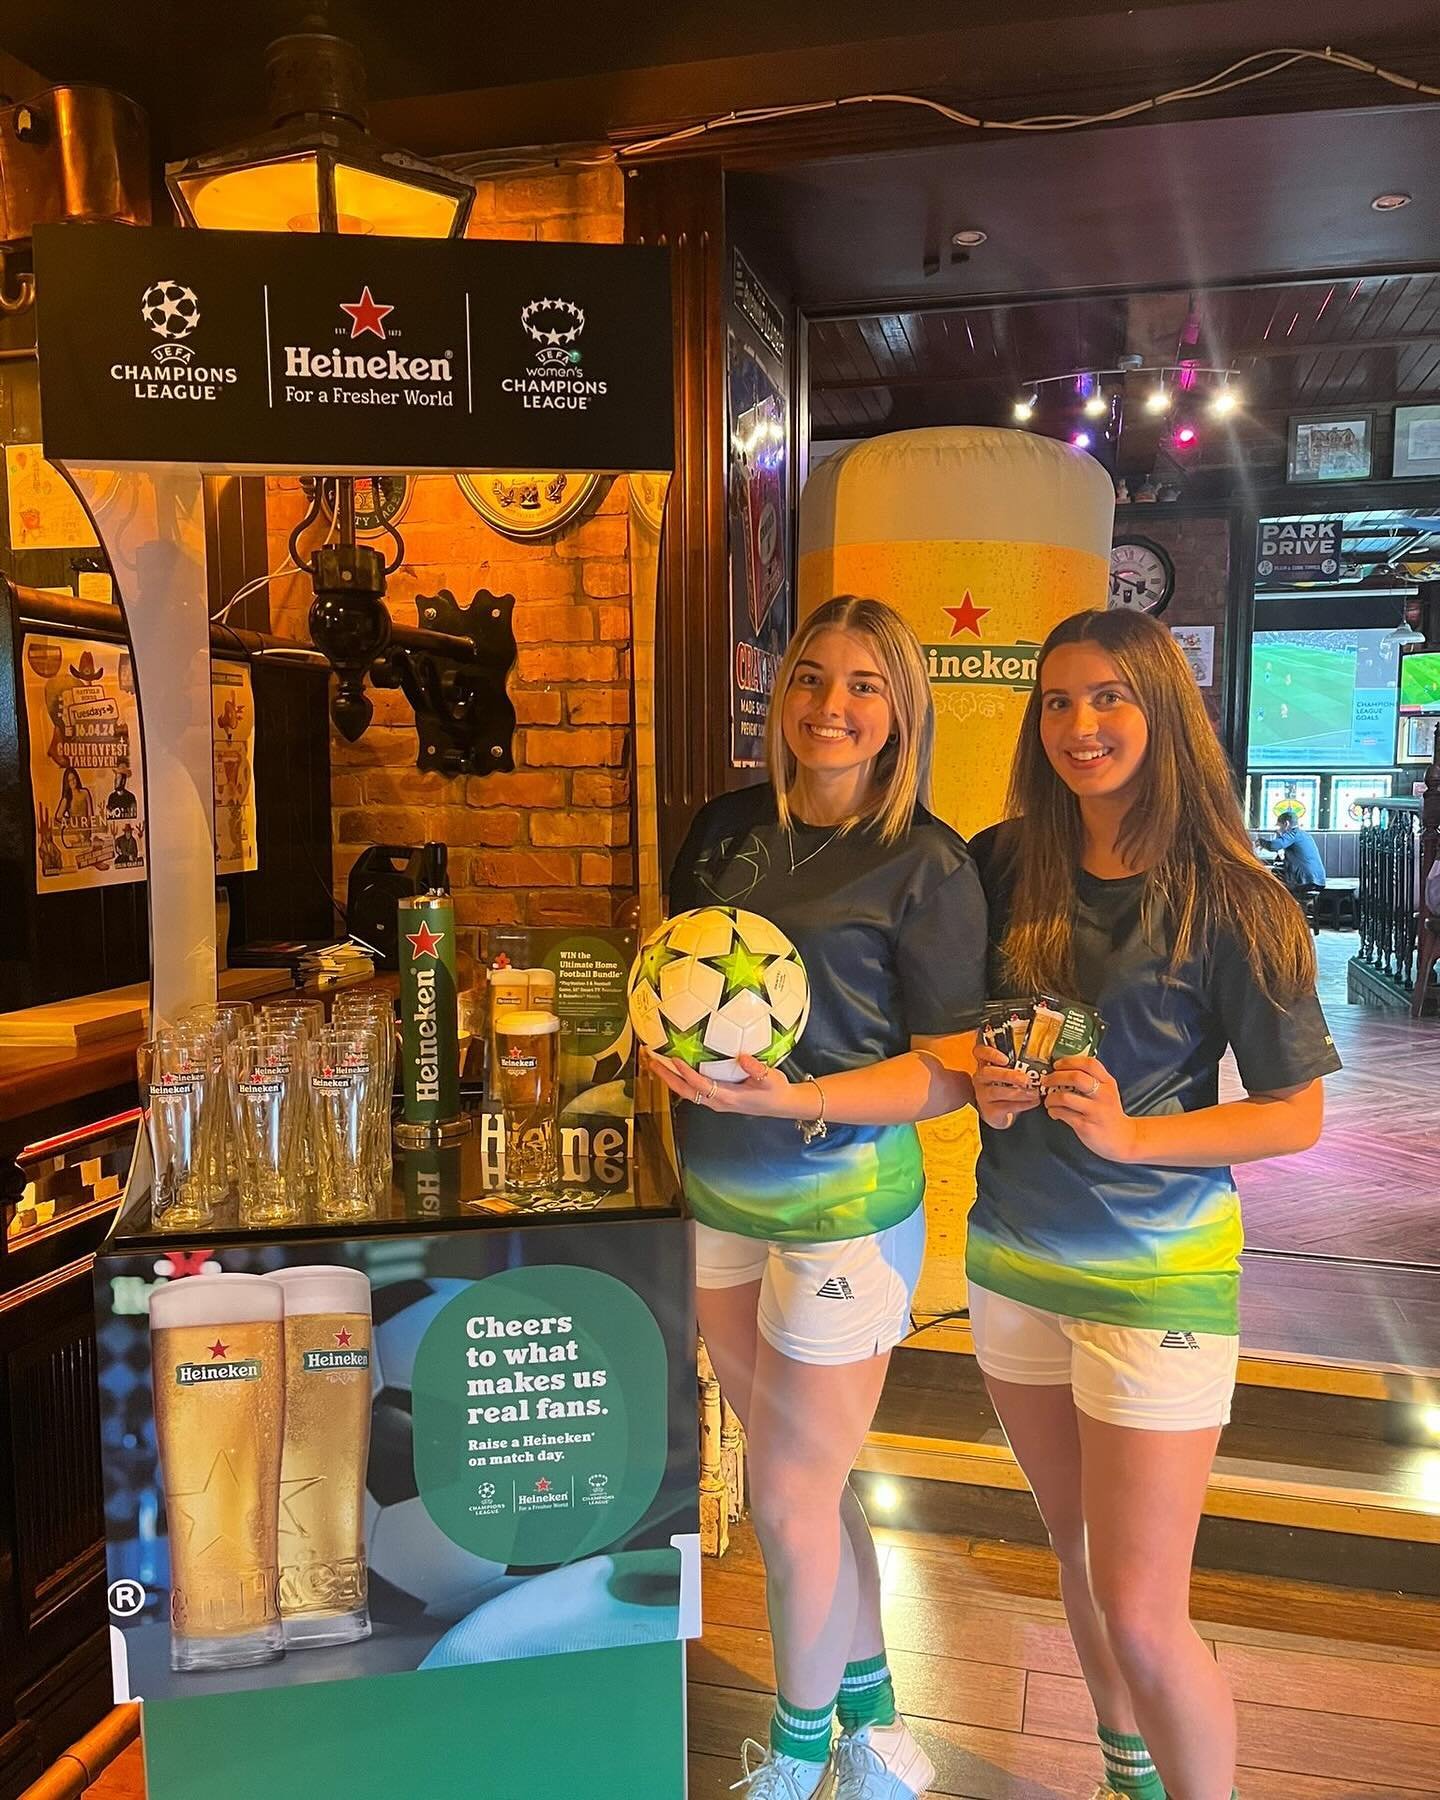 Who&rsquo;s for a game of foosball ⚽️

The #heniken Champions League Roadshow is coming to MainStreet TONIGHT from 7pm 🙌 🙌 

Join us in the MainStreet Square with the opportunity to get free Heineken brought to you by the promotional staff 🍺🍺⚽️⚽️